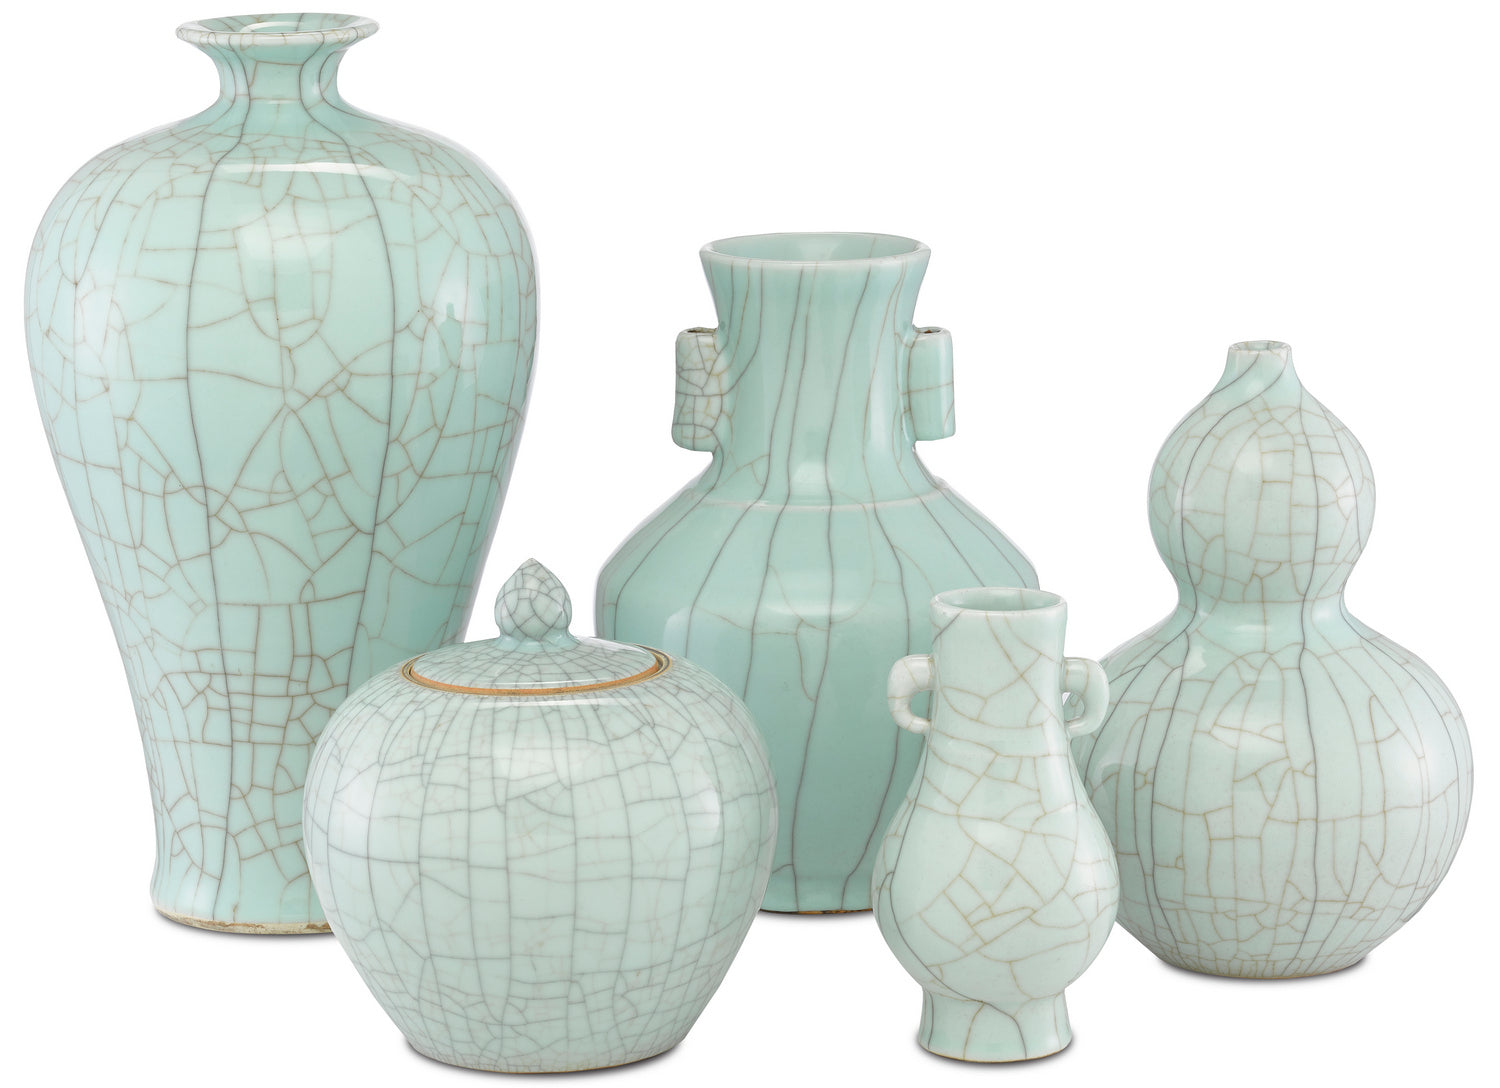 Jar from the Maiping collection in Celadon Crackle finish